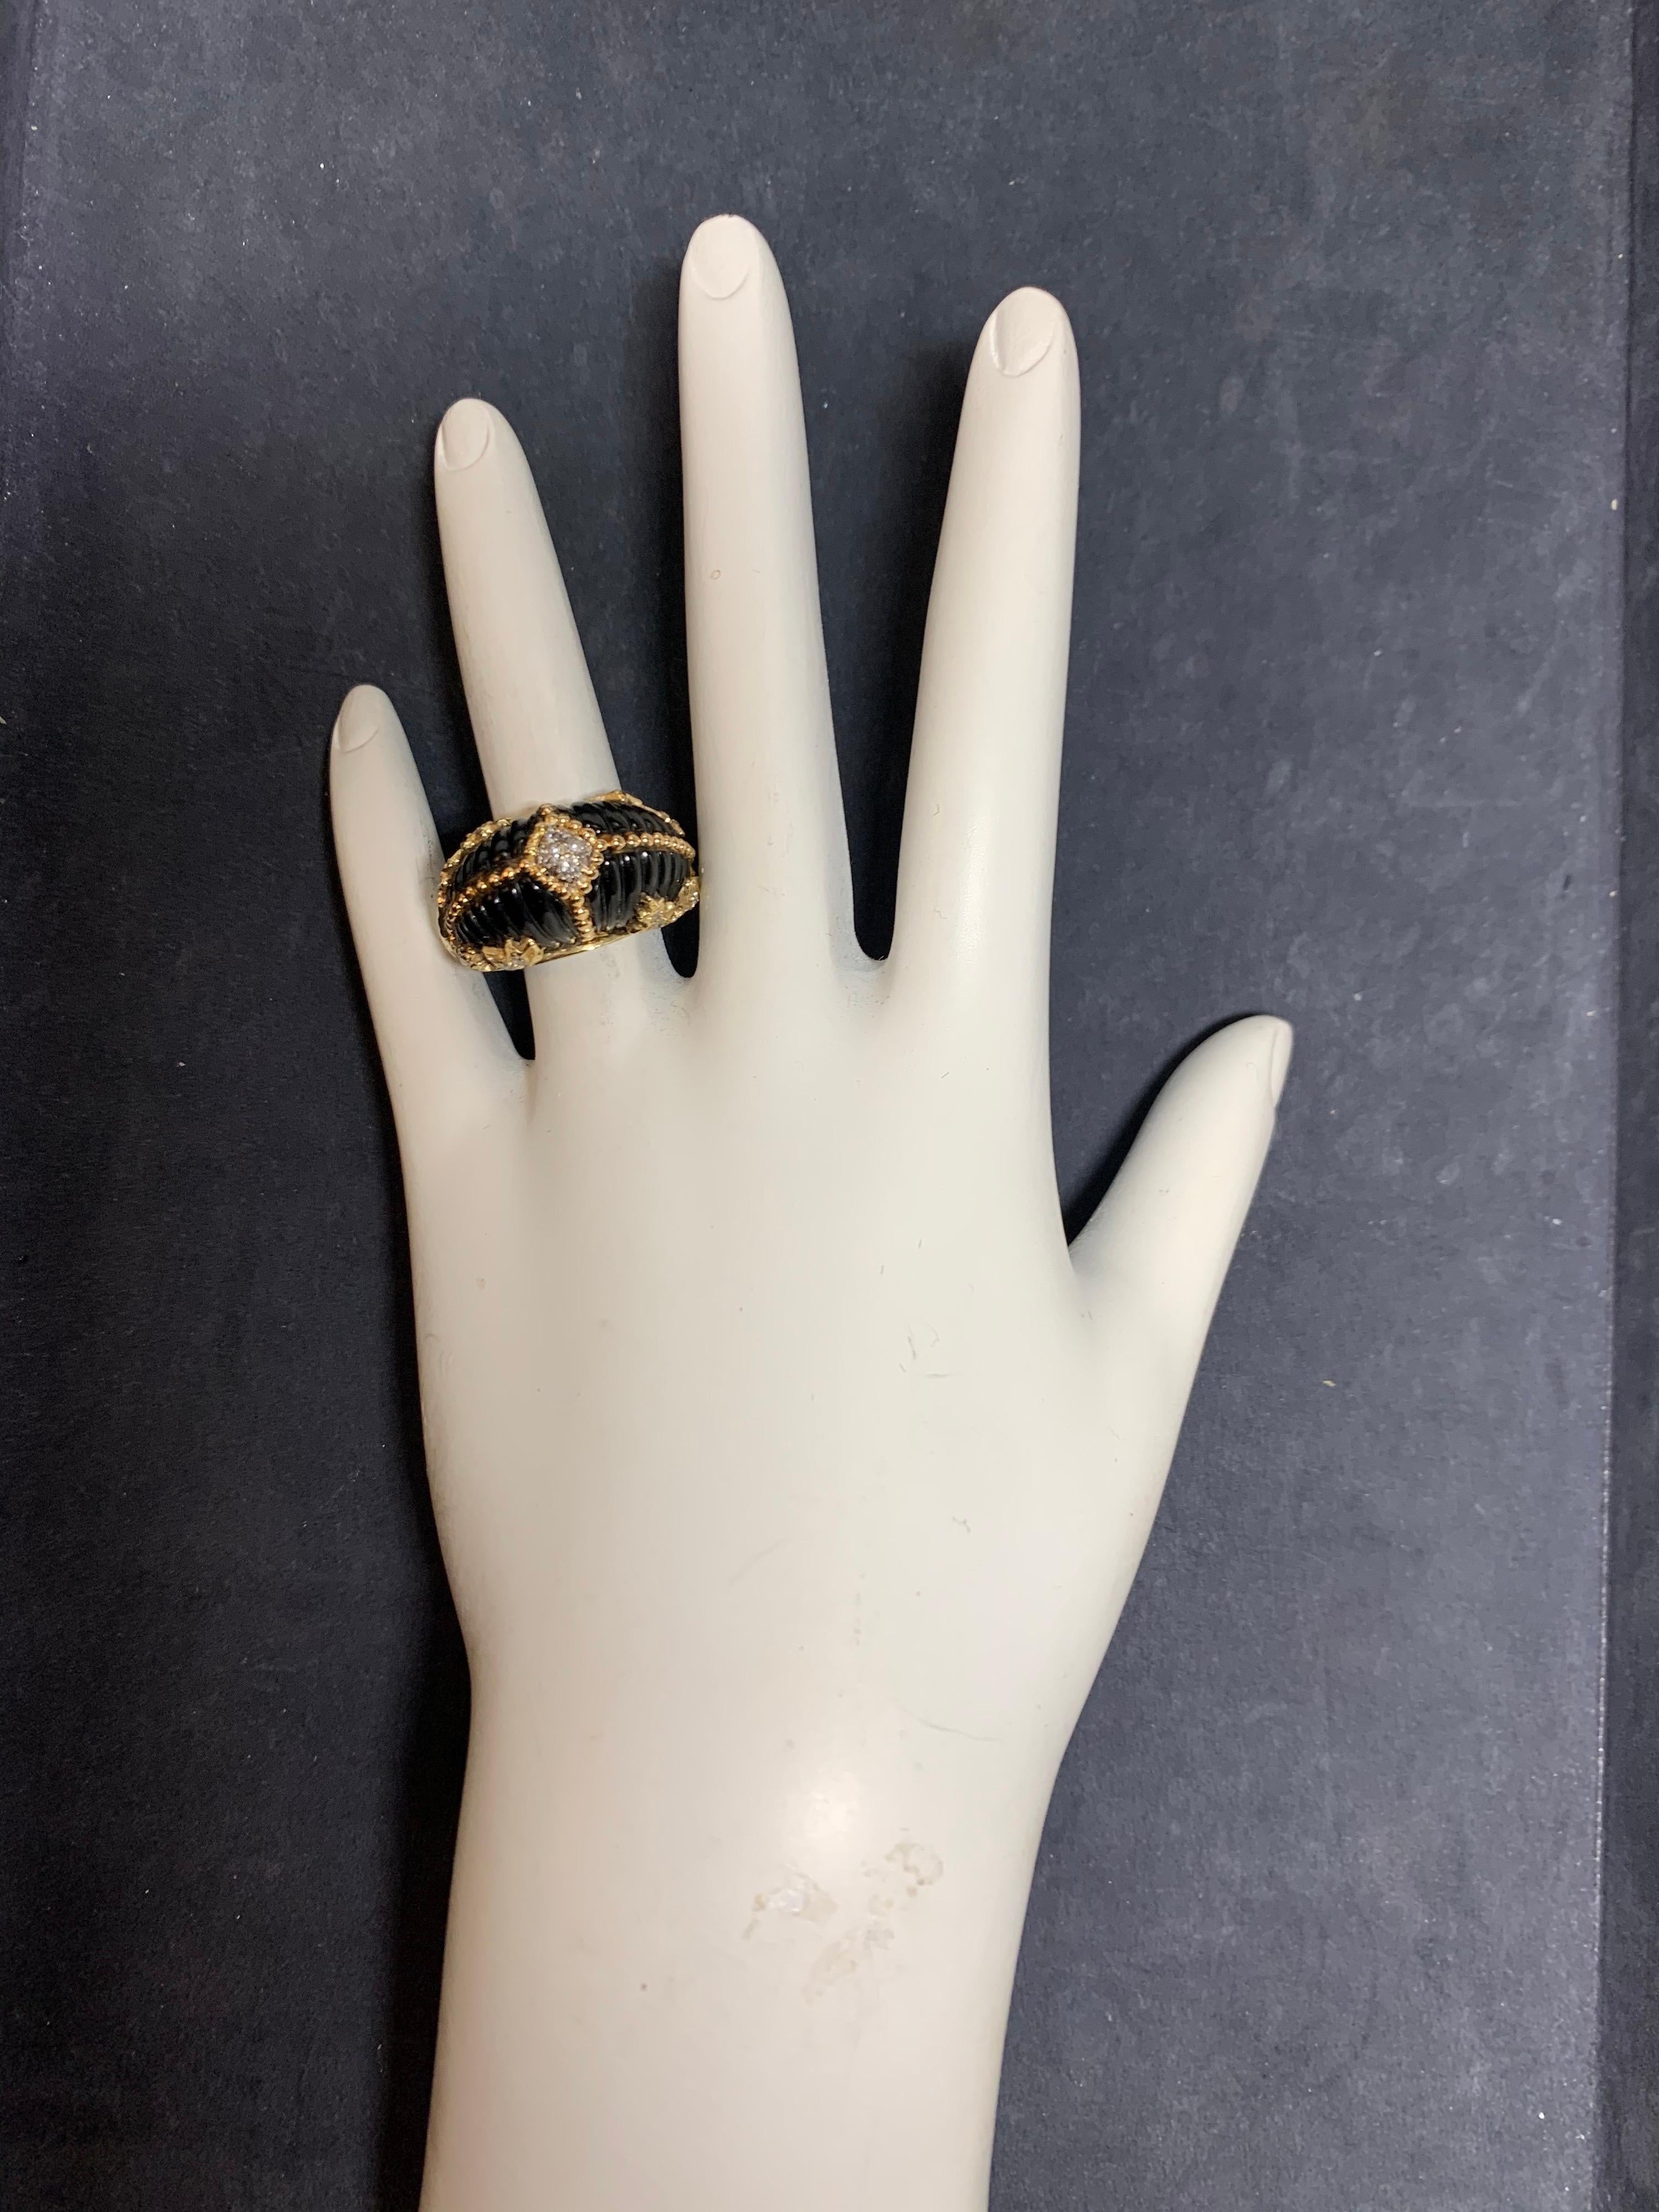 Retro 14k Yellow Gold Cocktail Ring set with 20 Natural Colorless Diamonds weighing 0.35 Carats.

The Onyx is Hand Carved and the ring weighs 12.8 grams. Size 7. 

(stock#1202)

Circa 1950.